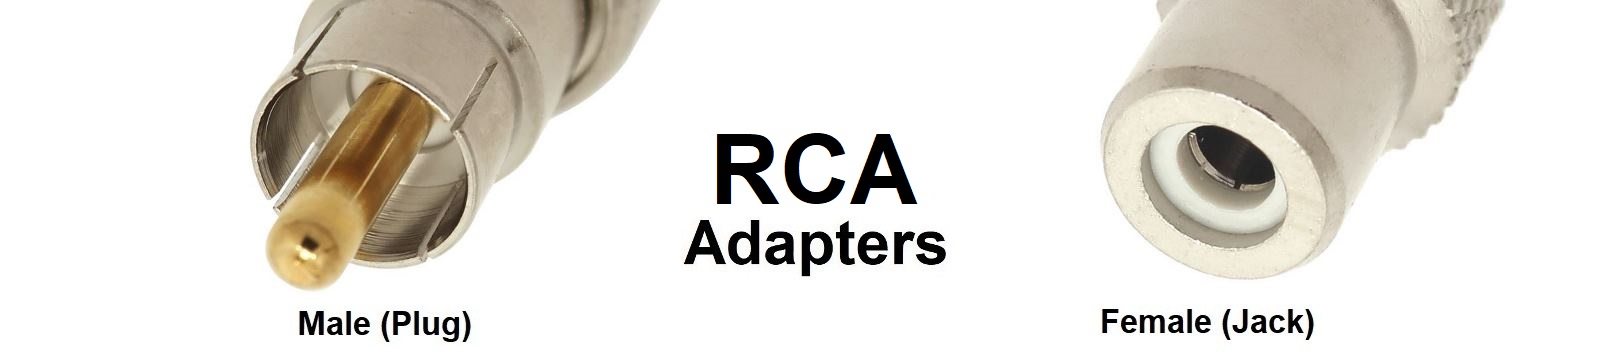 RCA Adapters Category Banner - Max-Gain Systems, Inc.